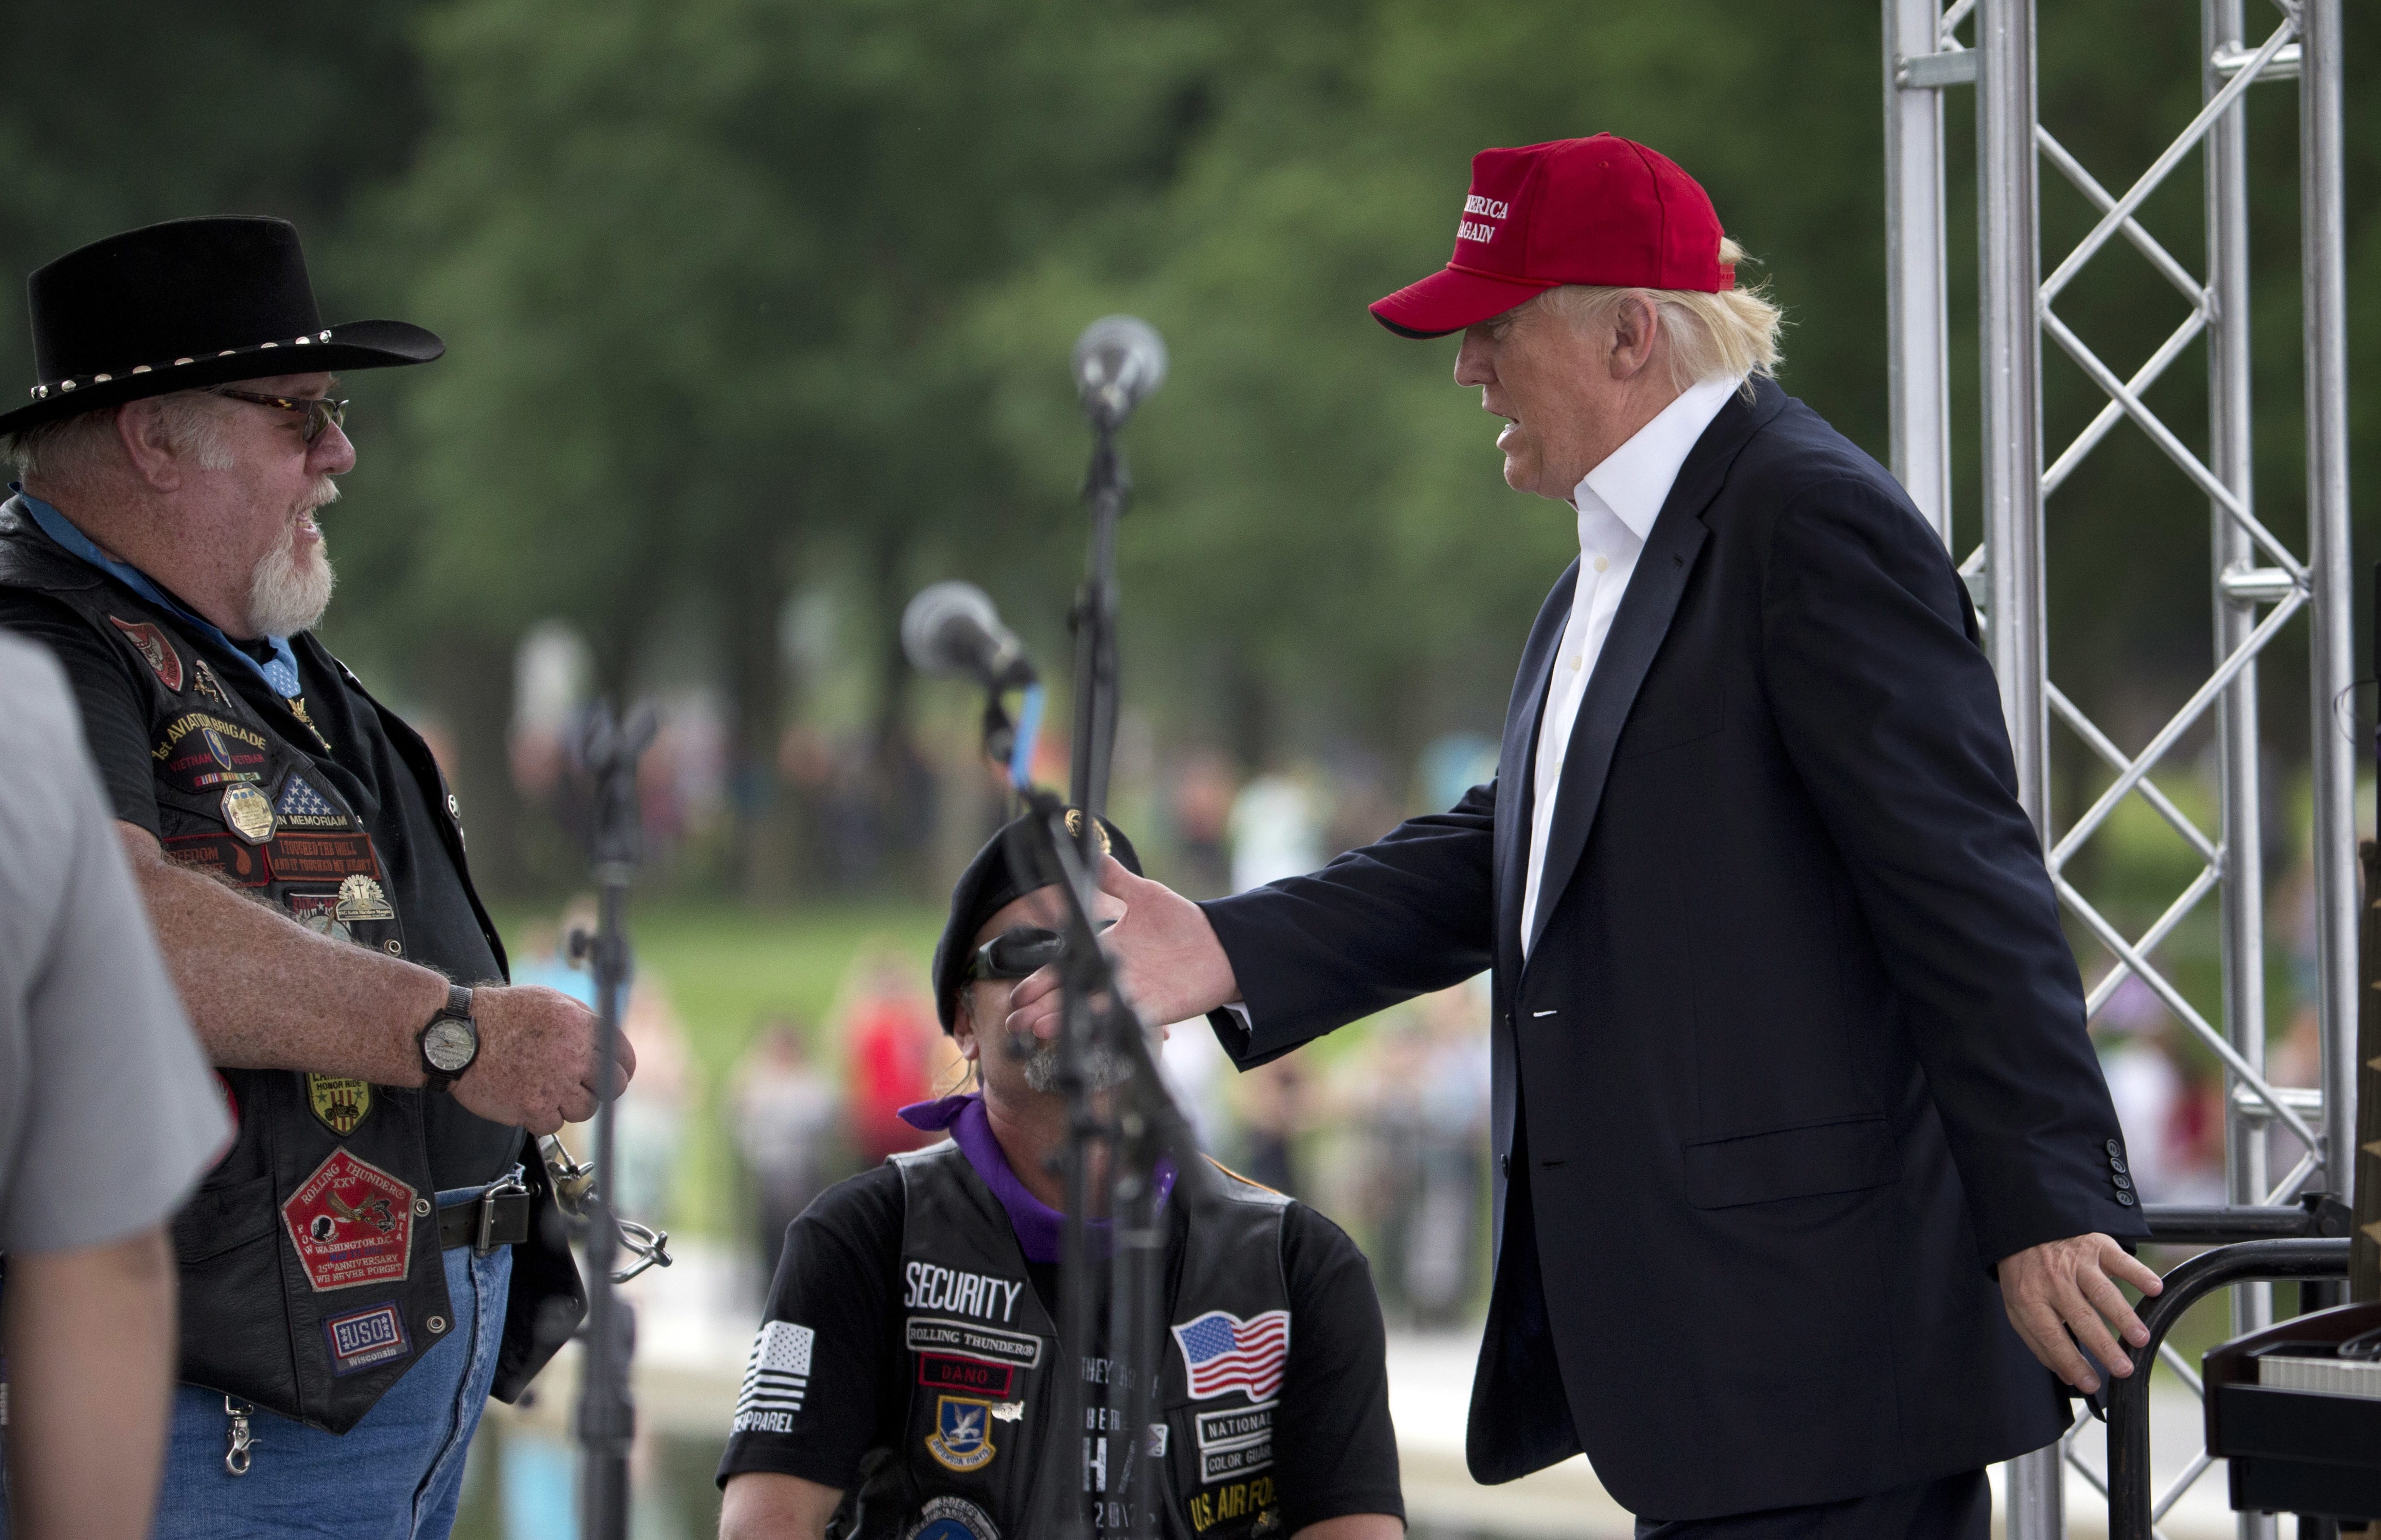 Republican presidential candidate Donald Trump, right, greets supporters and bikers at a Rolling Thunder rally at the National Mall in Washington, Sunday, May 29, 2016.